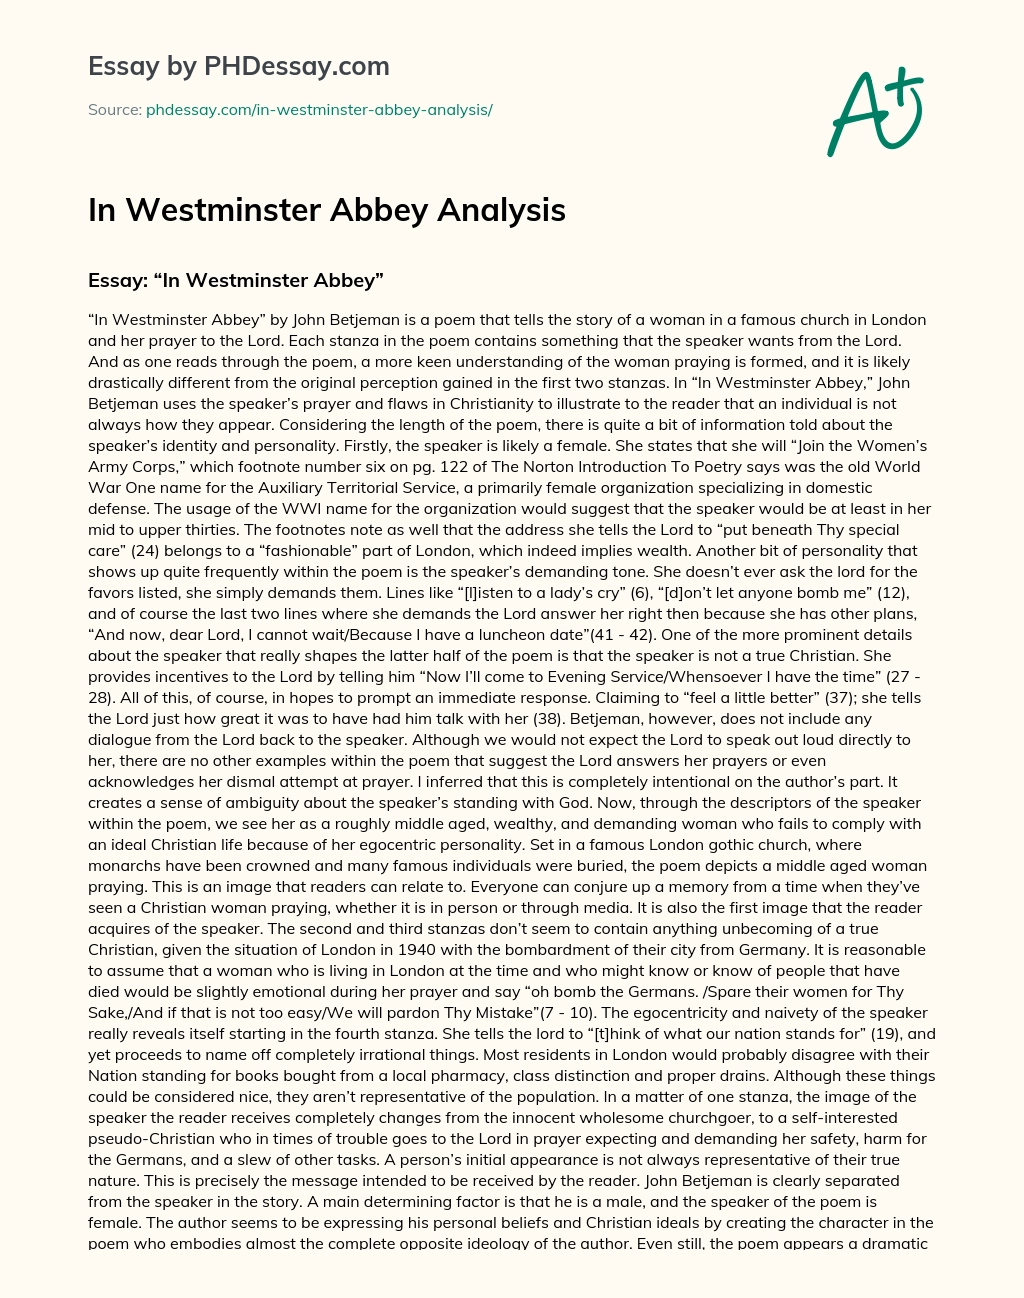 In Westminster Abbey Analysis essay